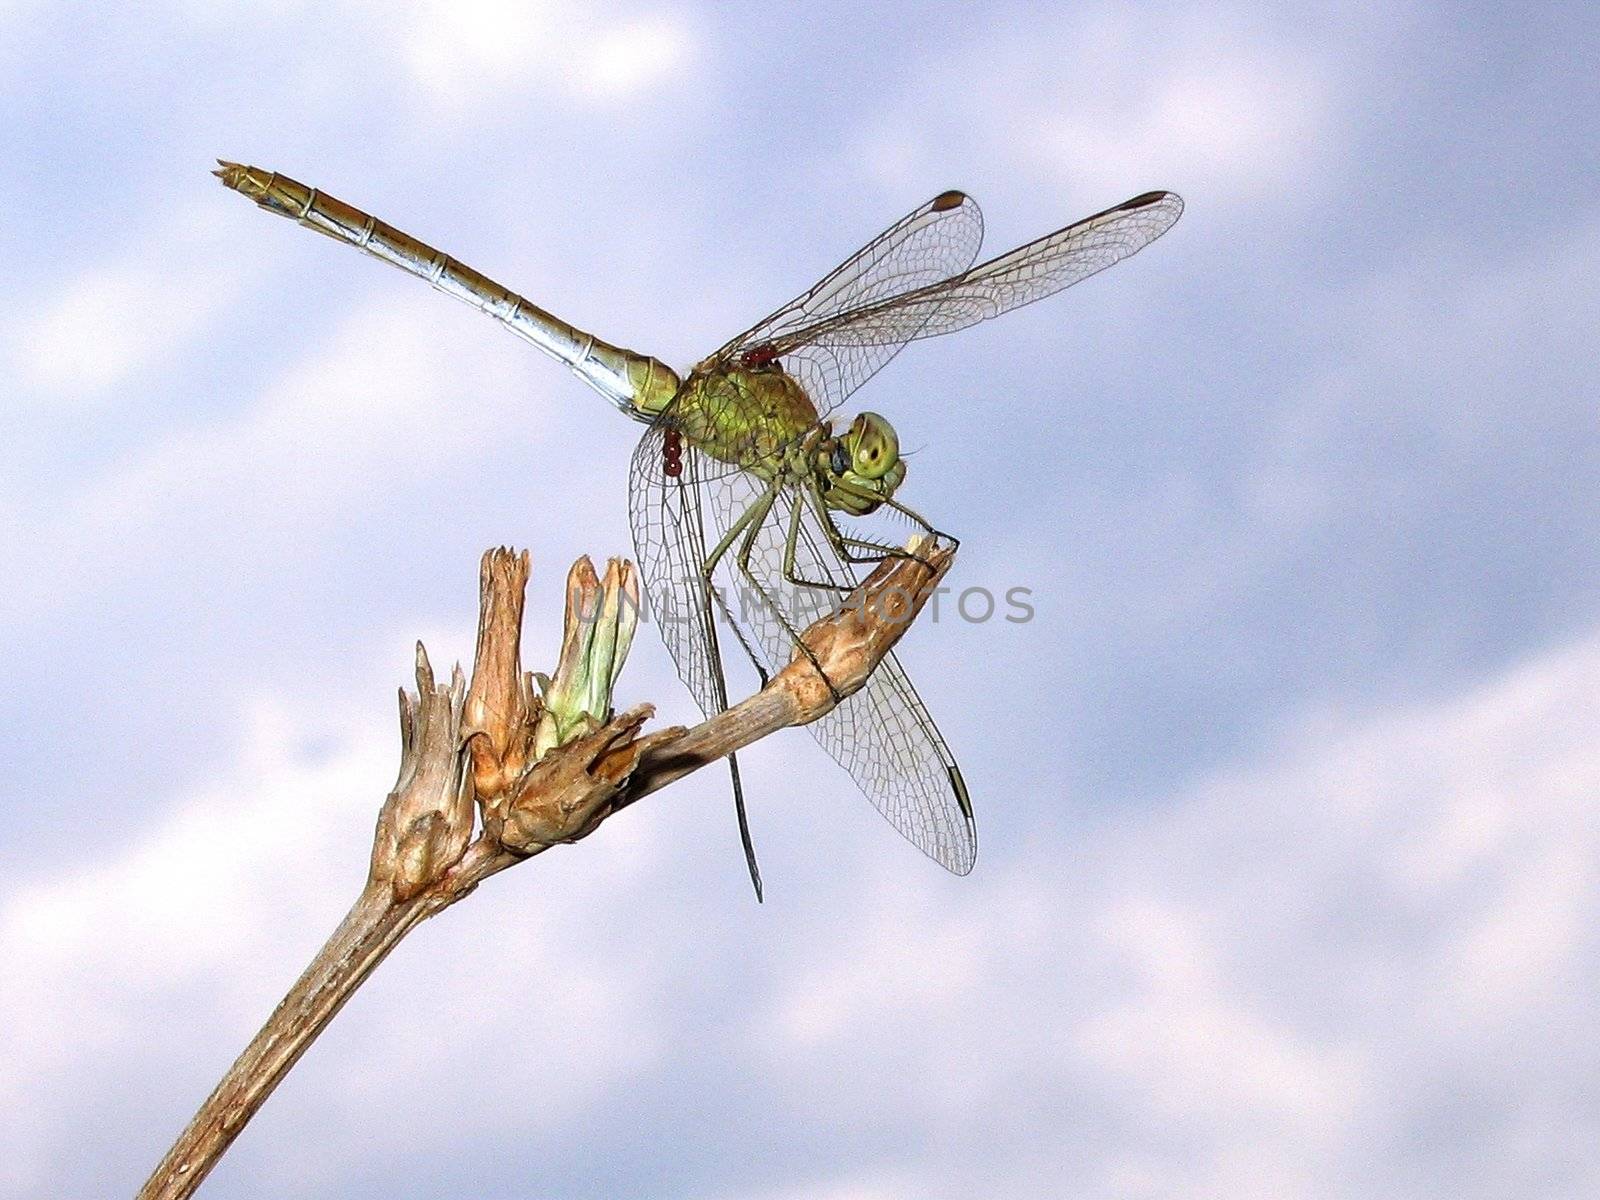 Dragonfly on branch, on background sky